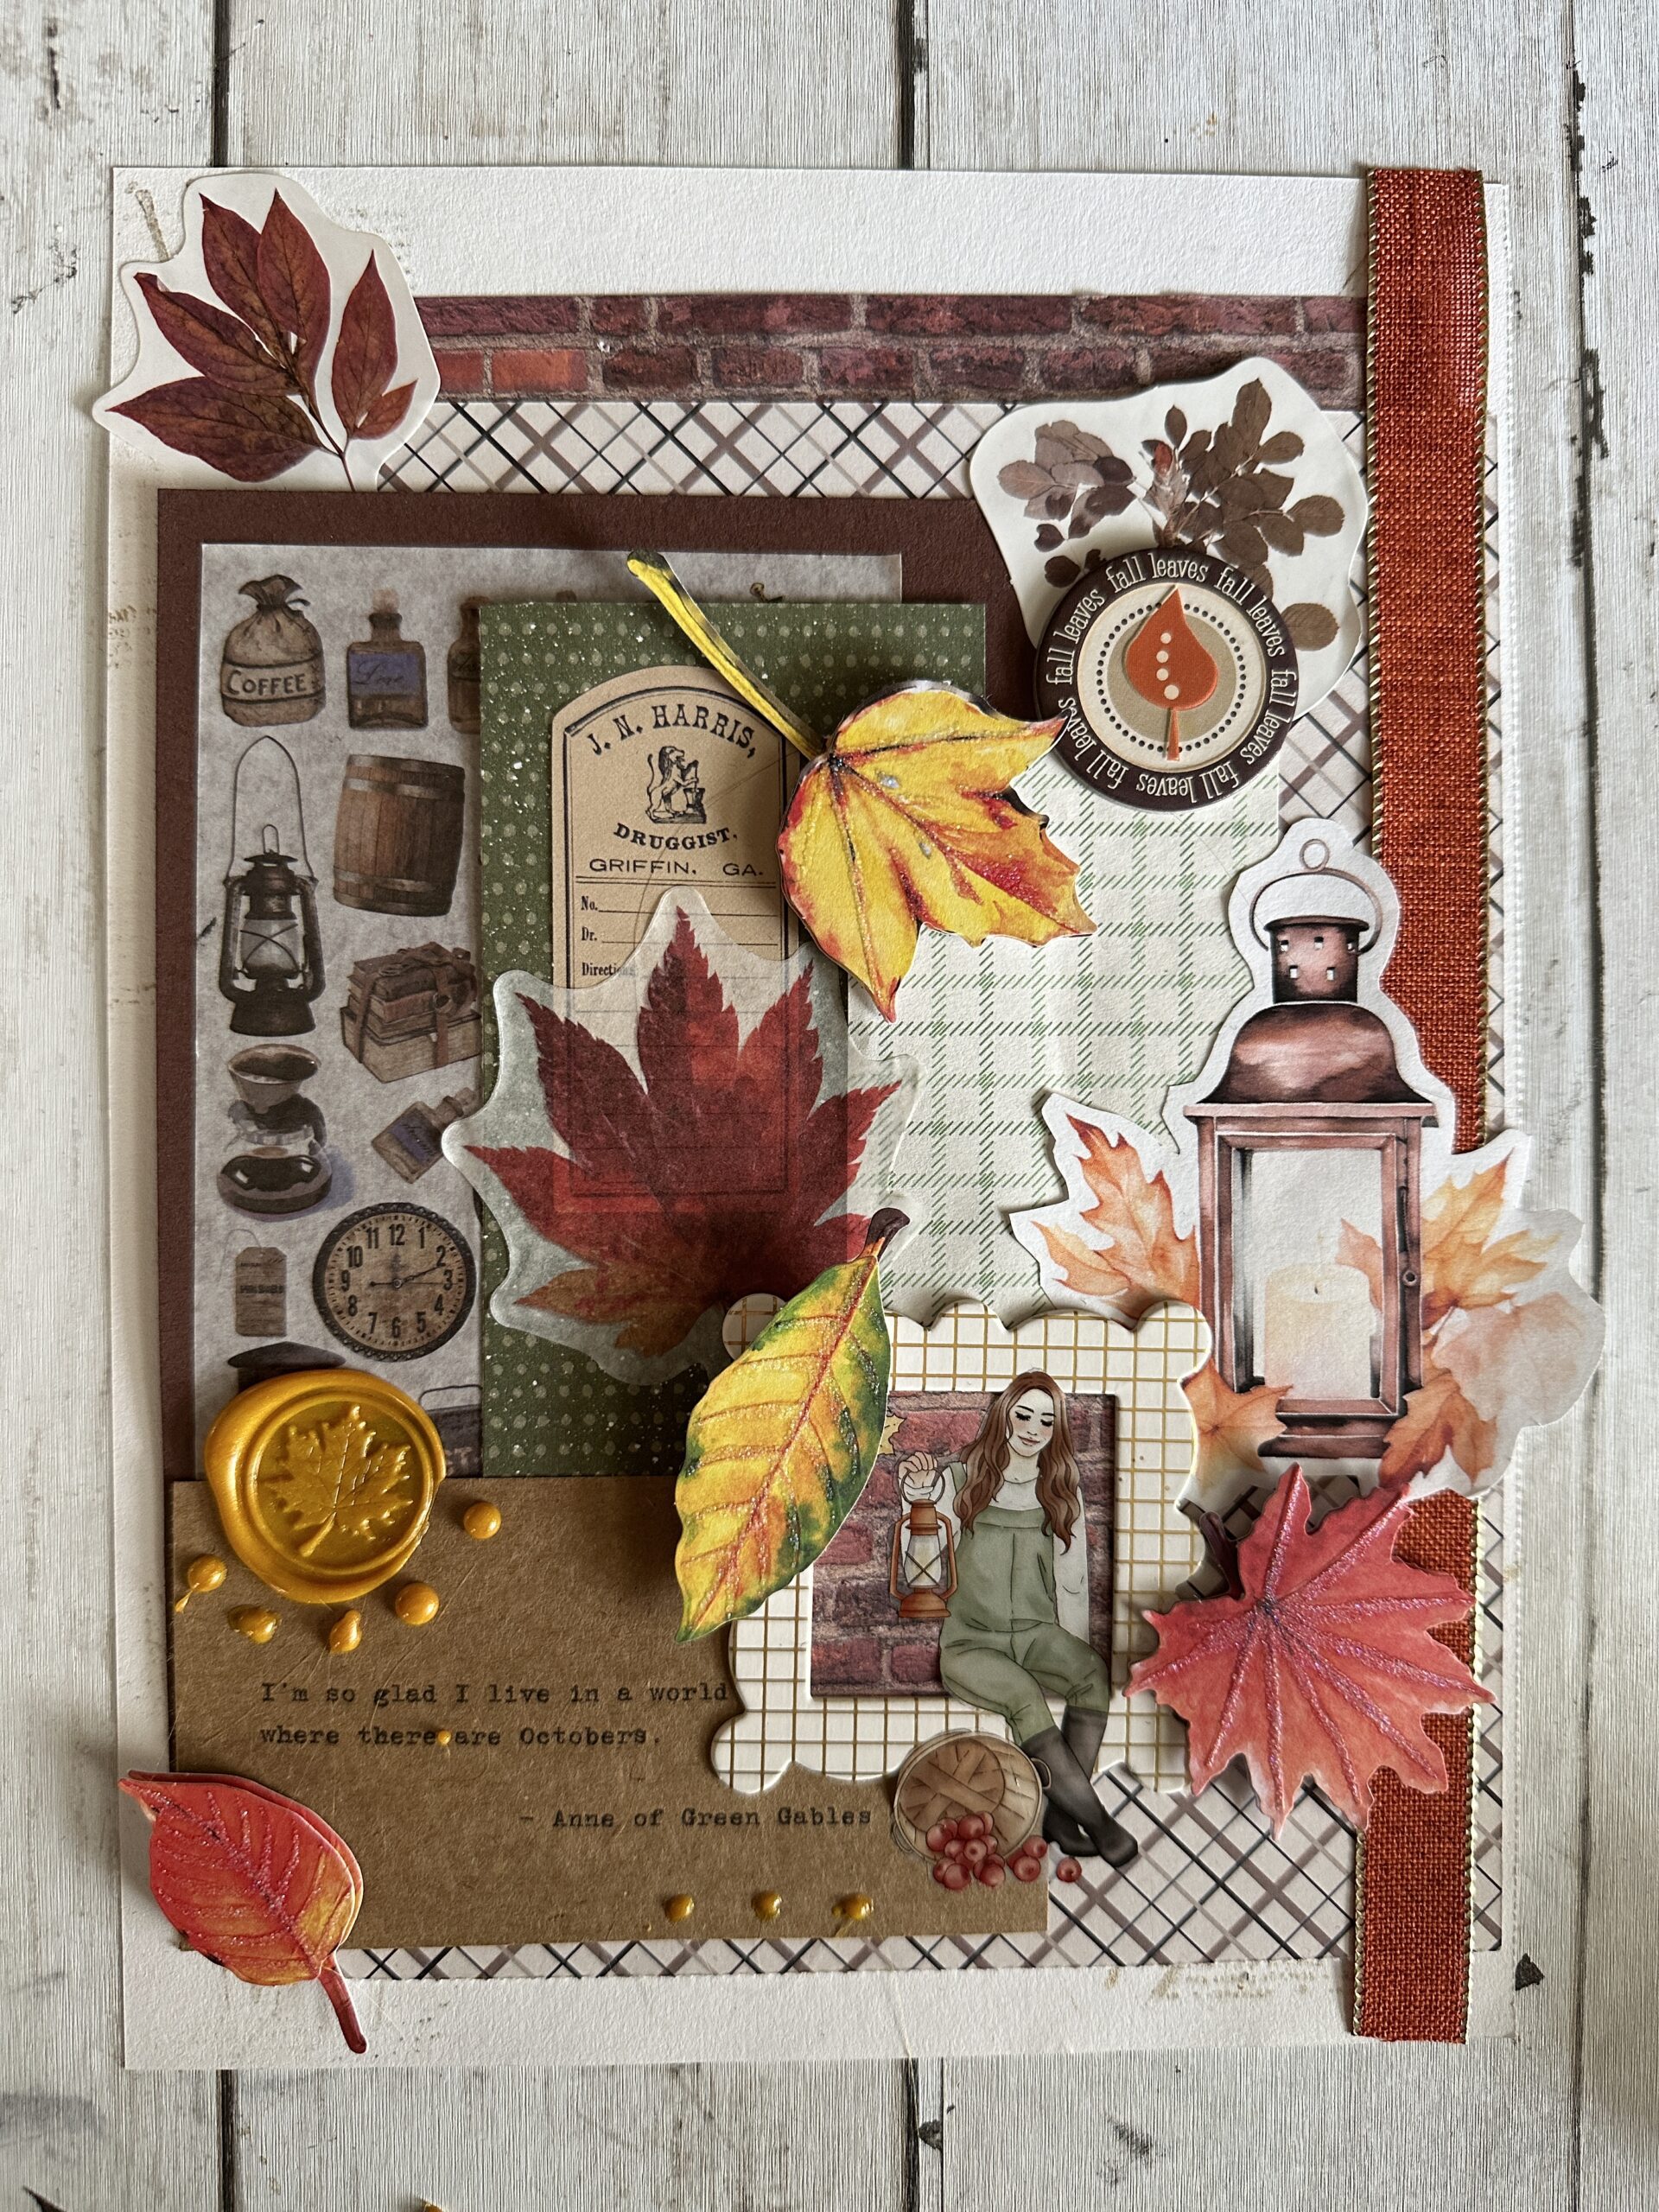 Junk journal layout with warm browns and oranges featuring falling leaves, a girl with a bucket of apples, lantern, a quote card and wax seal